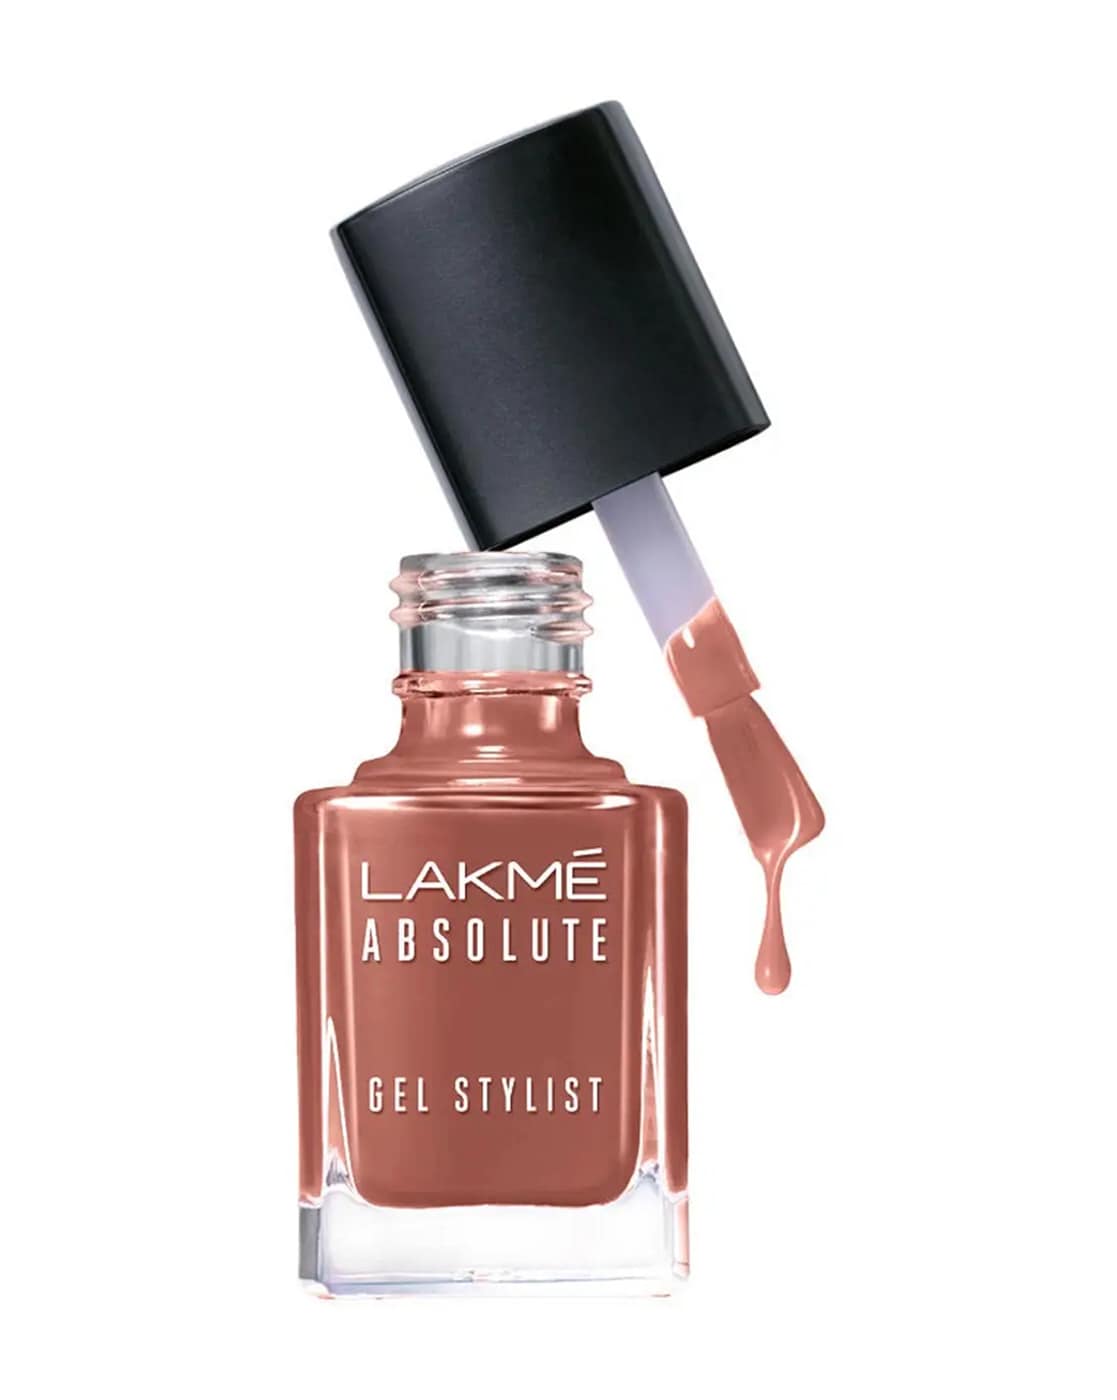 Lakme Absolute Gel Stylist Nail Color, Tomato Tango,12ml, Bottle at Rs 400  in Delhi